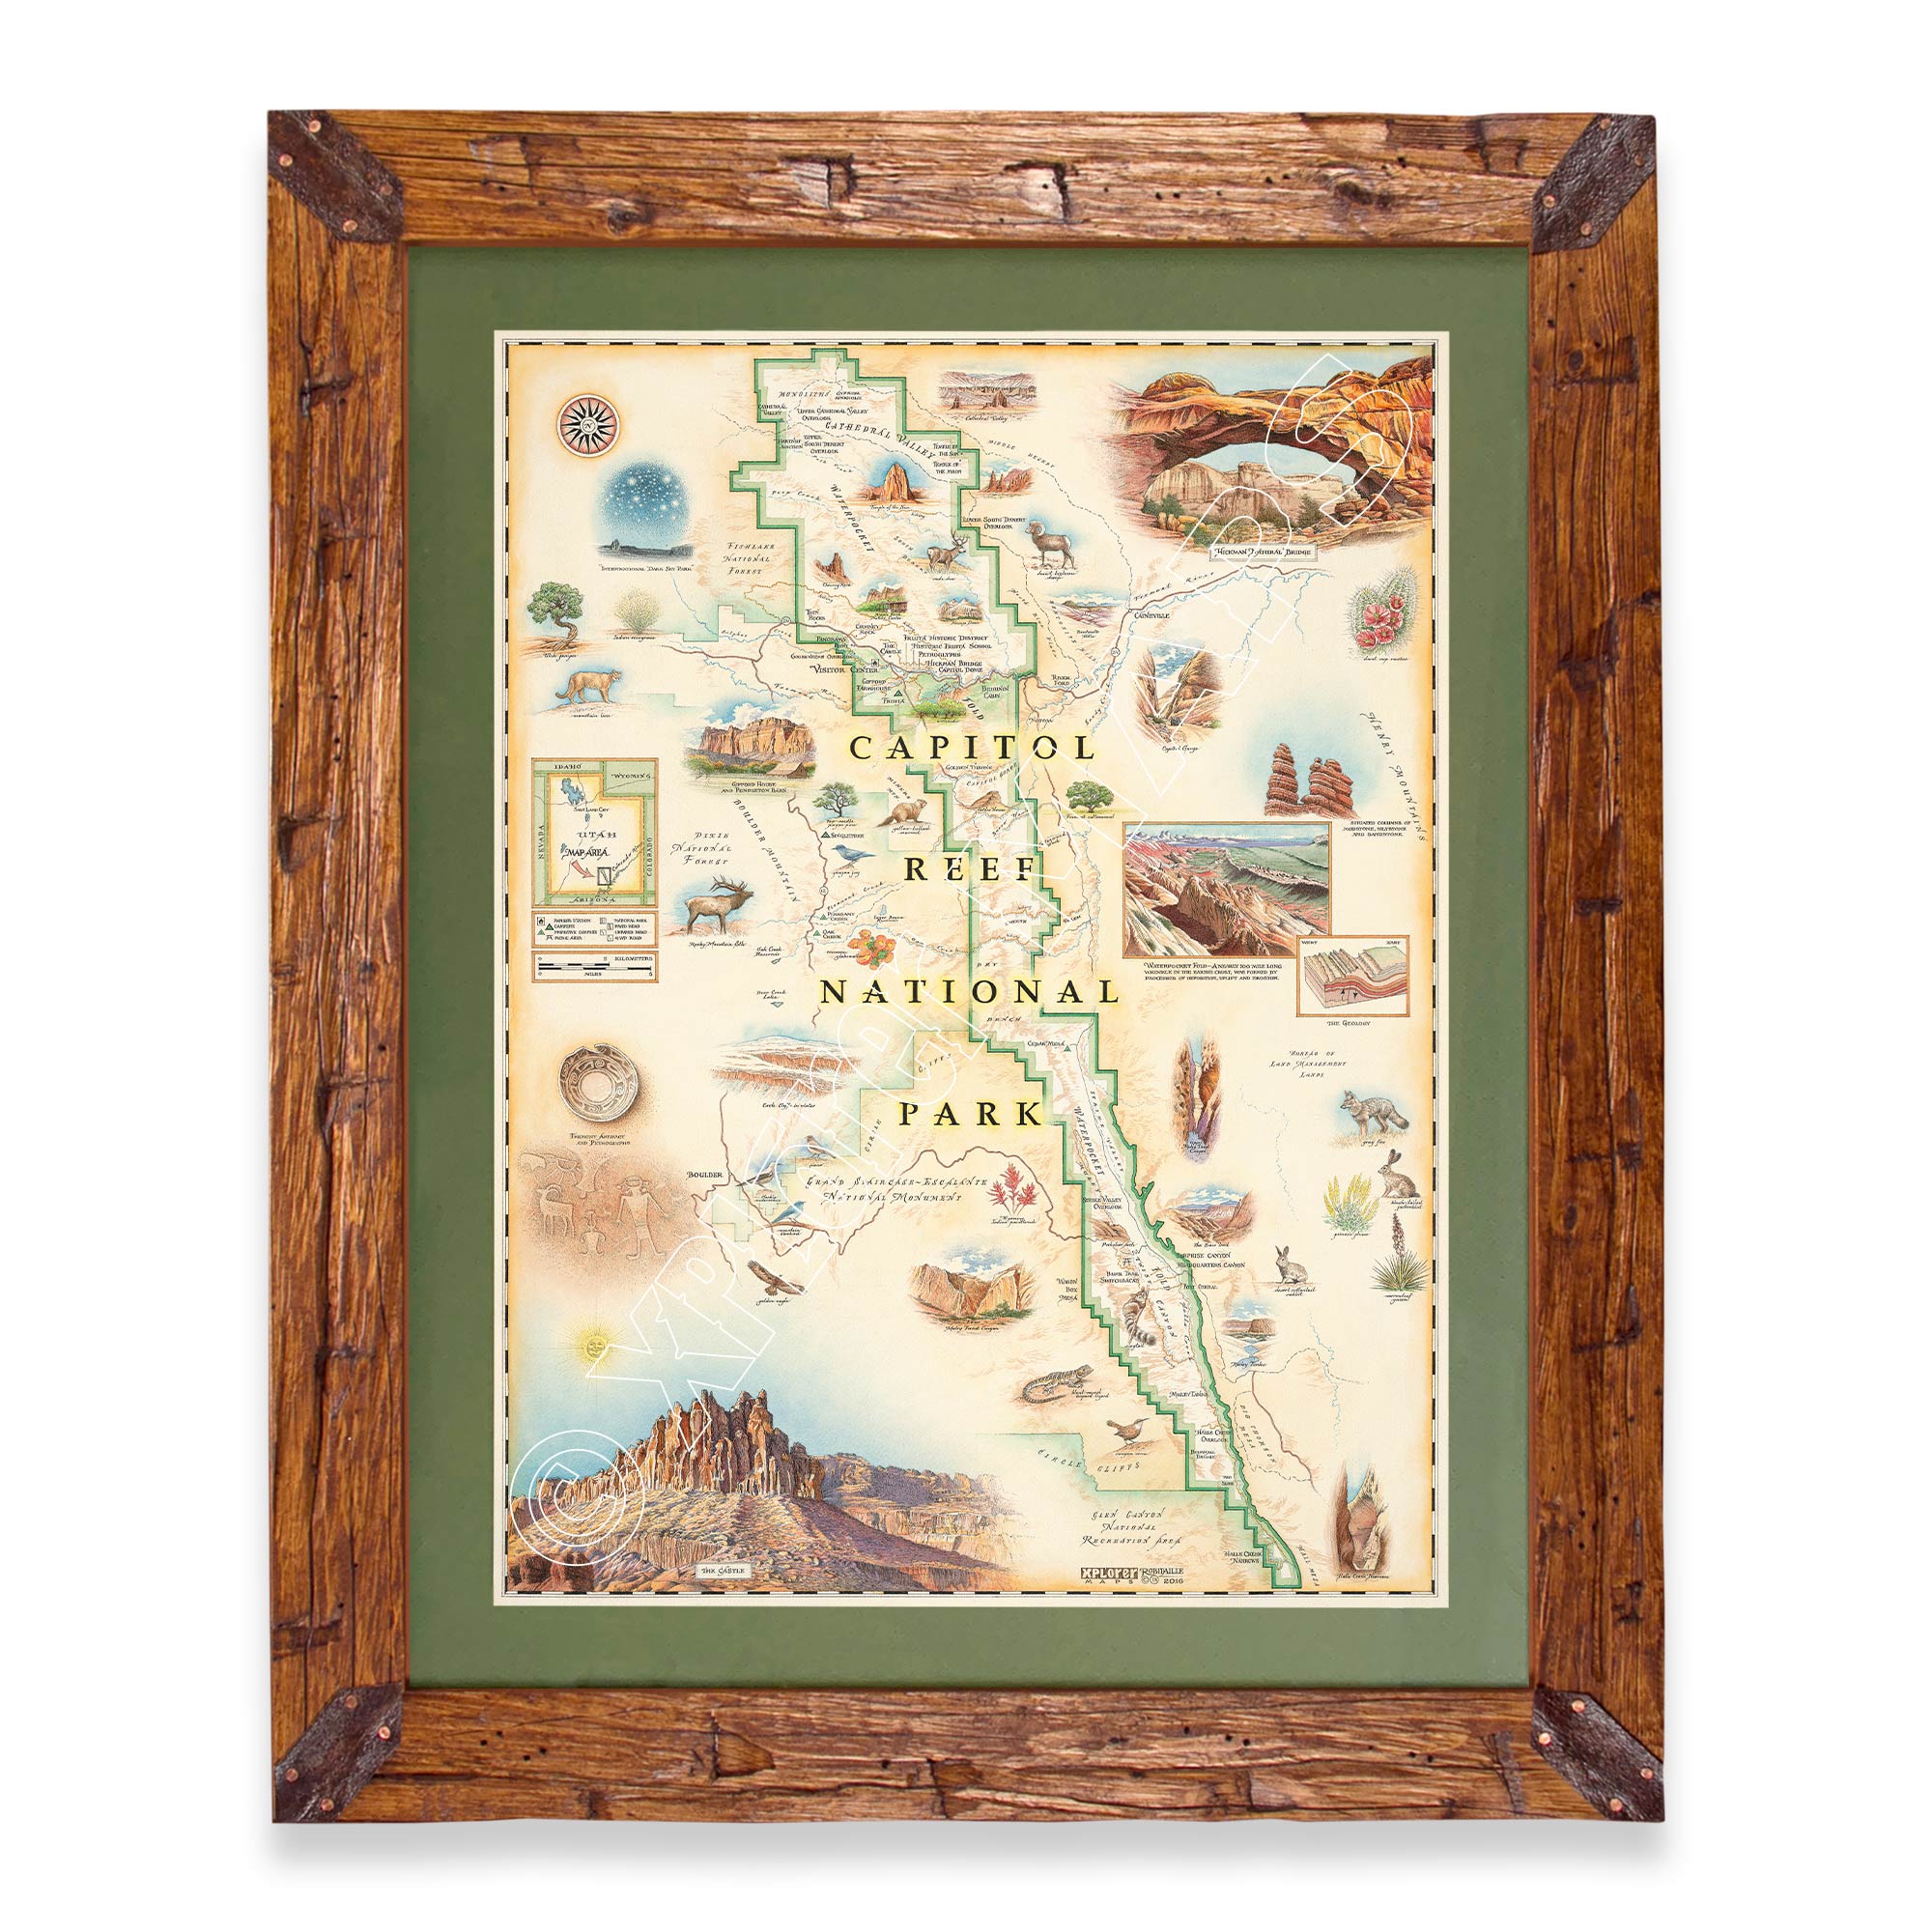 Utah's Capitol Reef National Park hand-drawn map in a Montana hand-scraped pine wood frame with green mat.